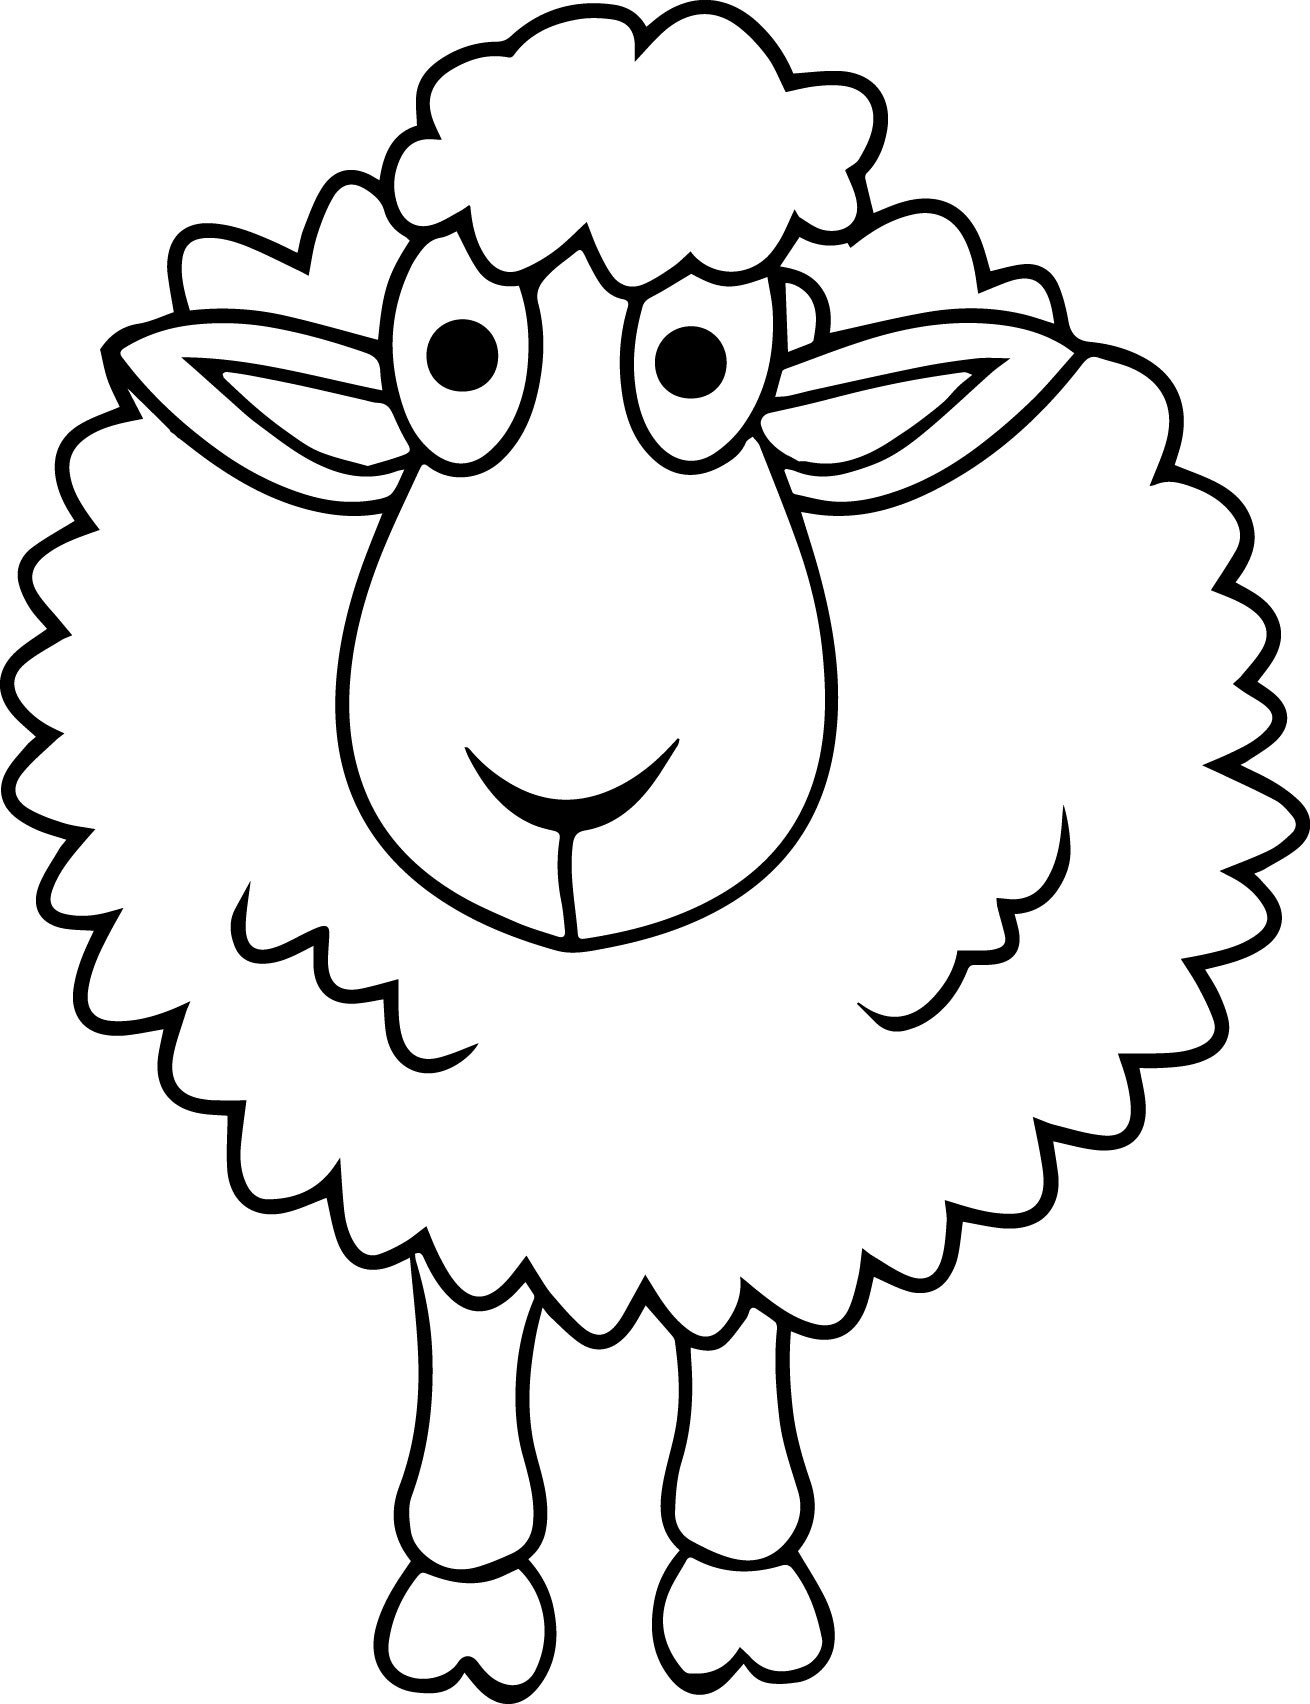 Free Printable Pictures Of Sheep - Free Printable Pictures Of Sheep